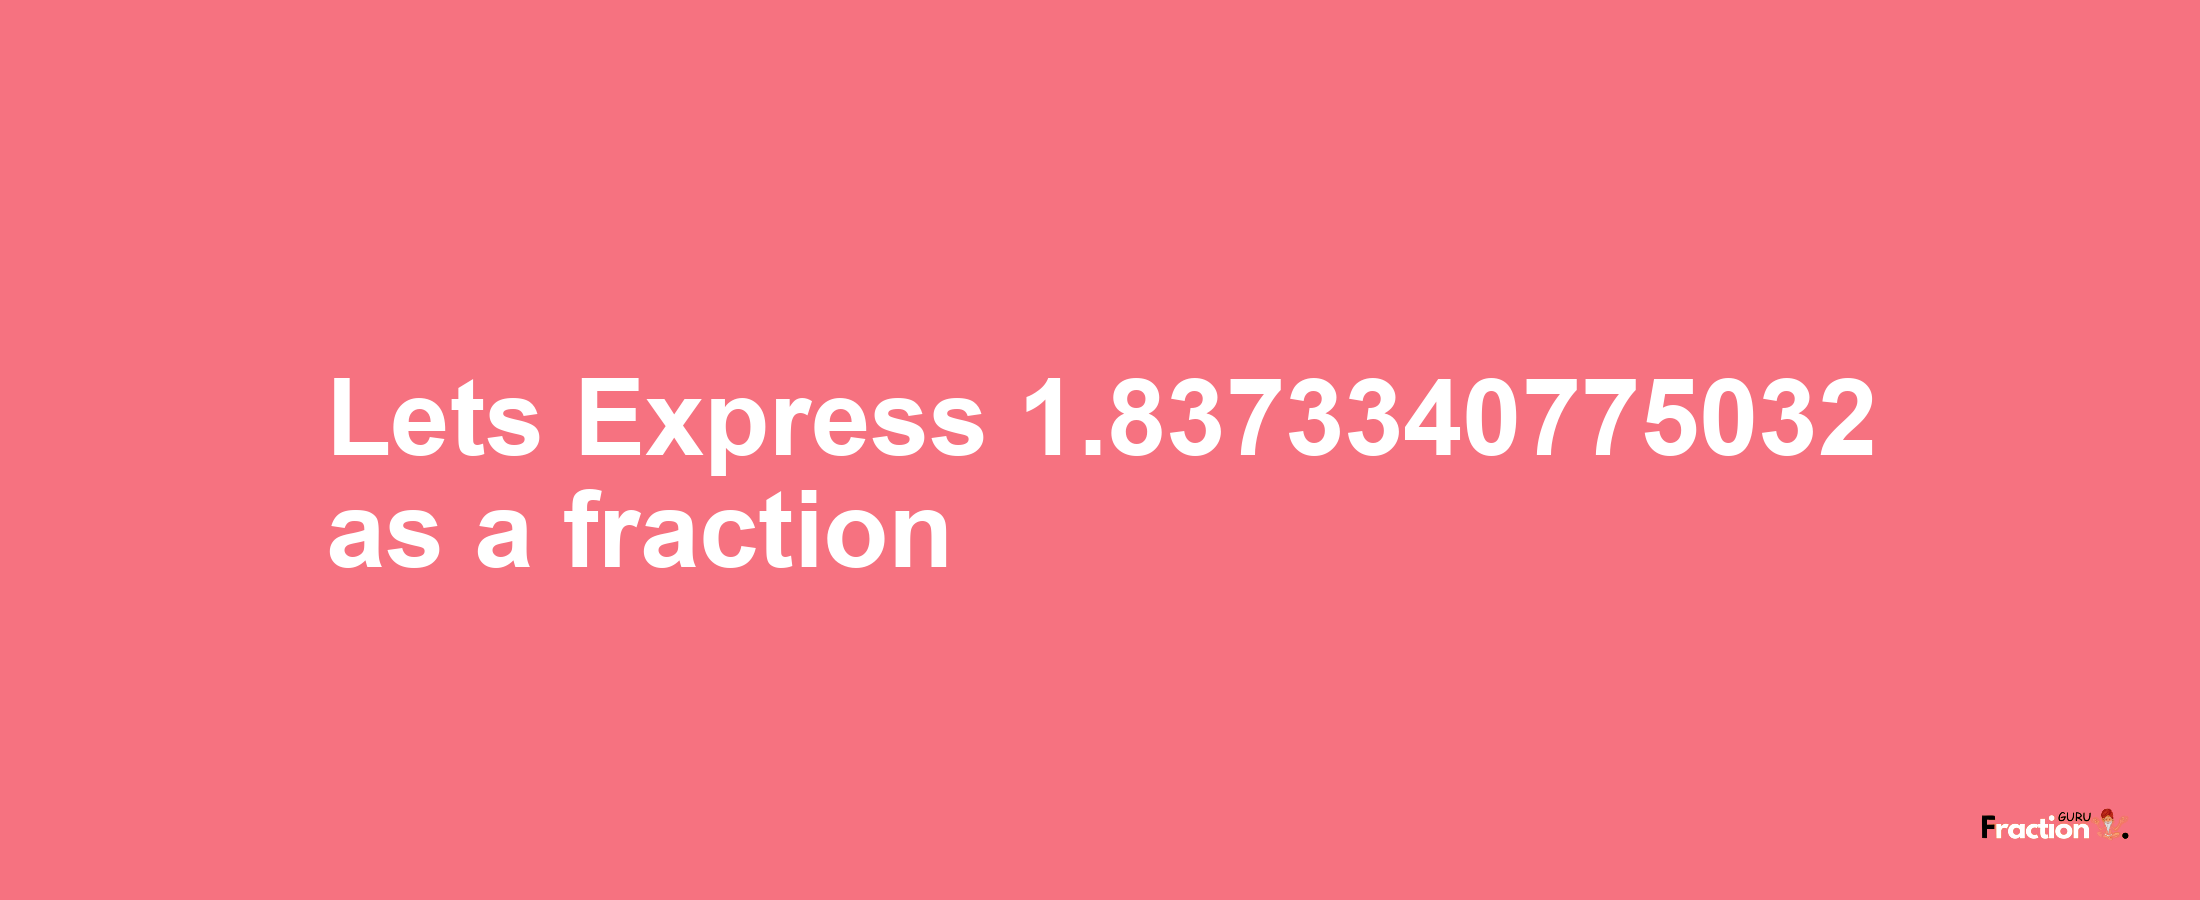 Lets Express 1.8373340775032 as afraction